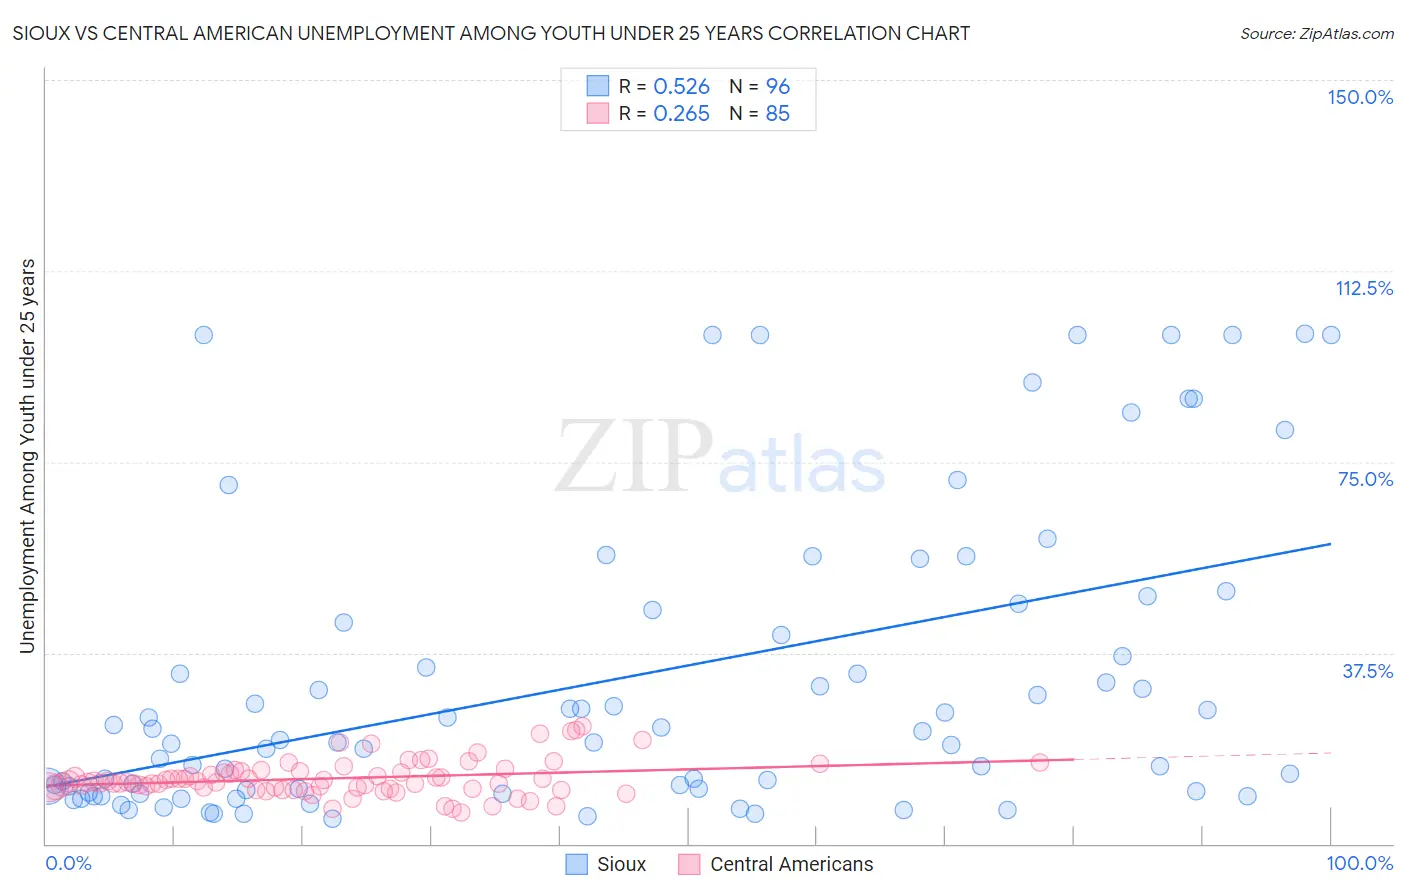 Sioux vs Central American Unemployment Among Youth under 25 years